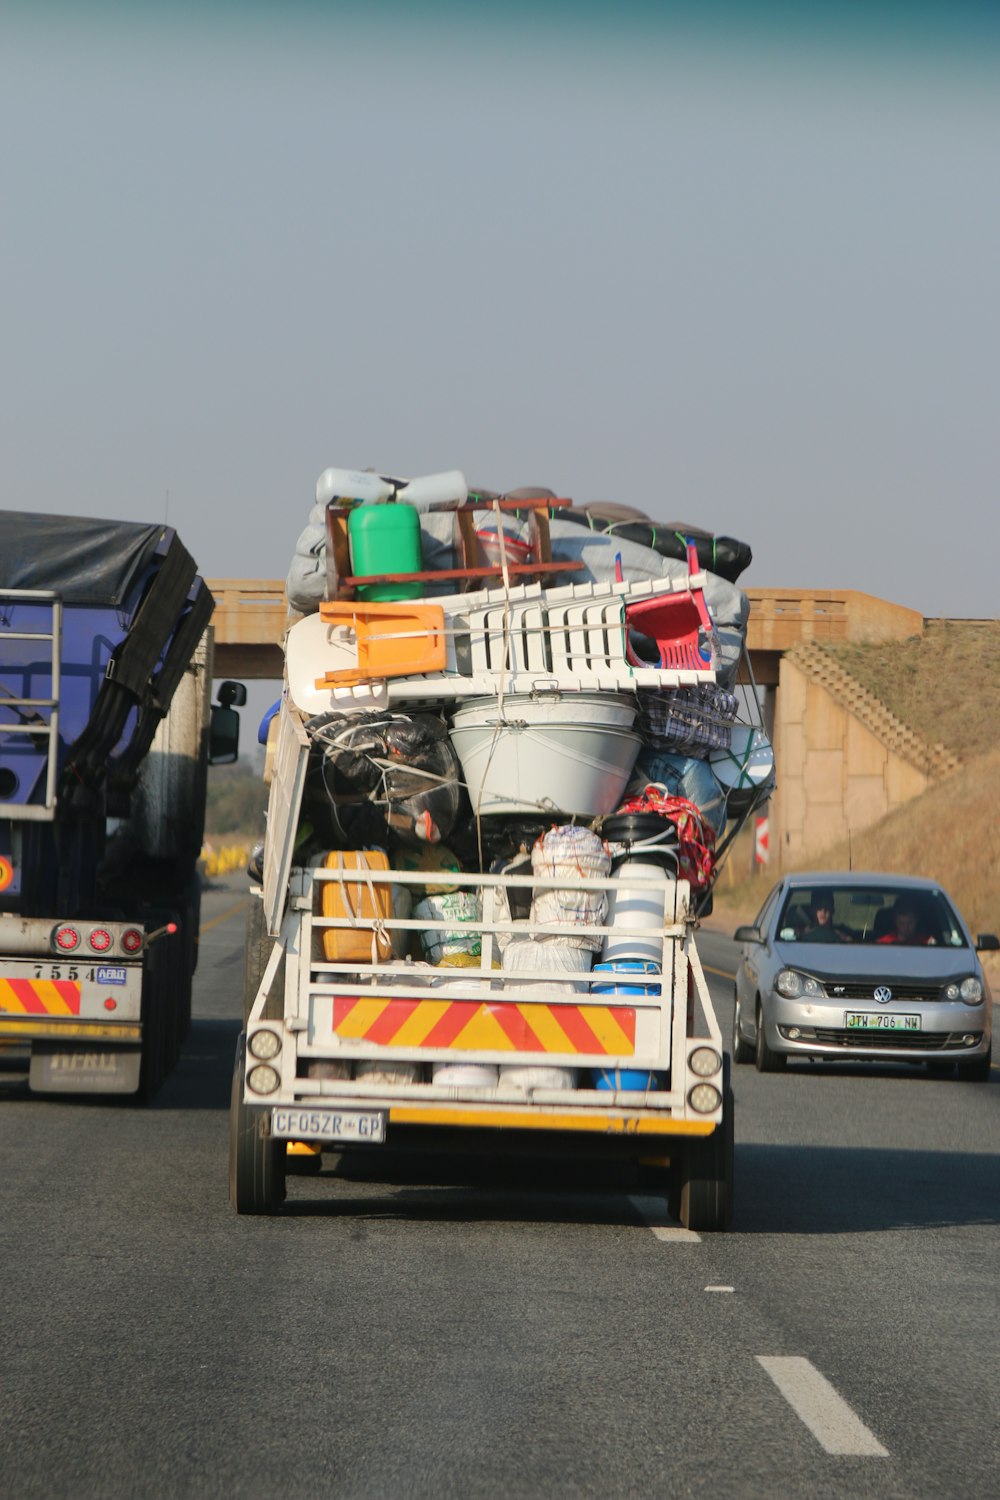 truck carrying plasticware on the road near vehicles during day